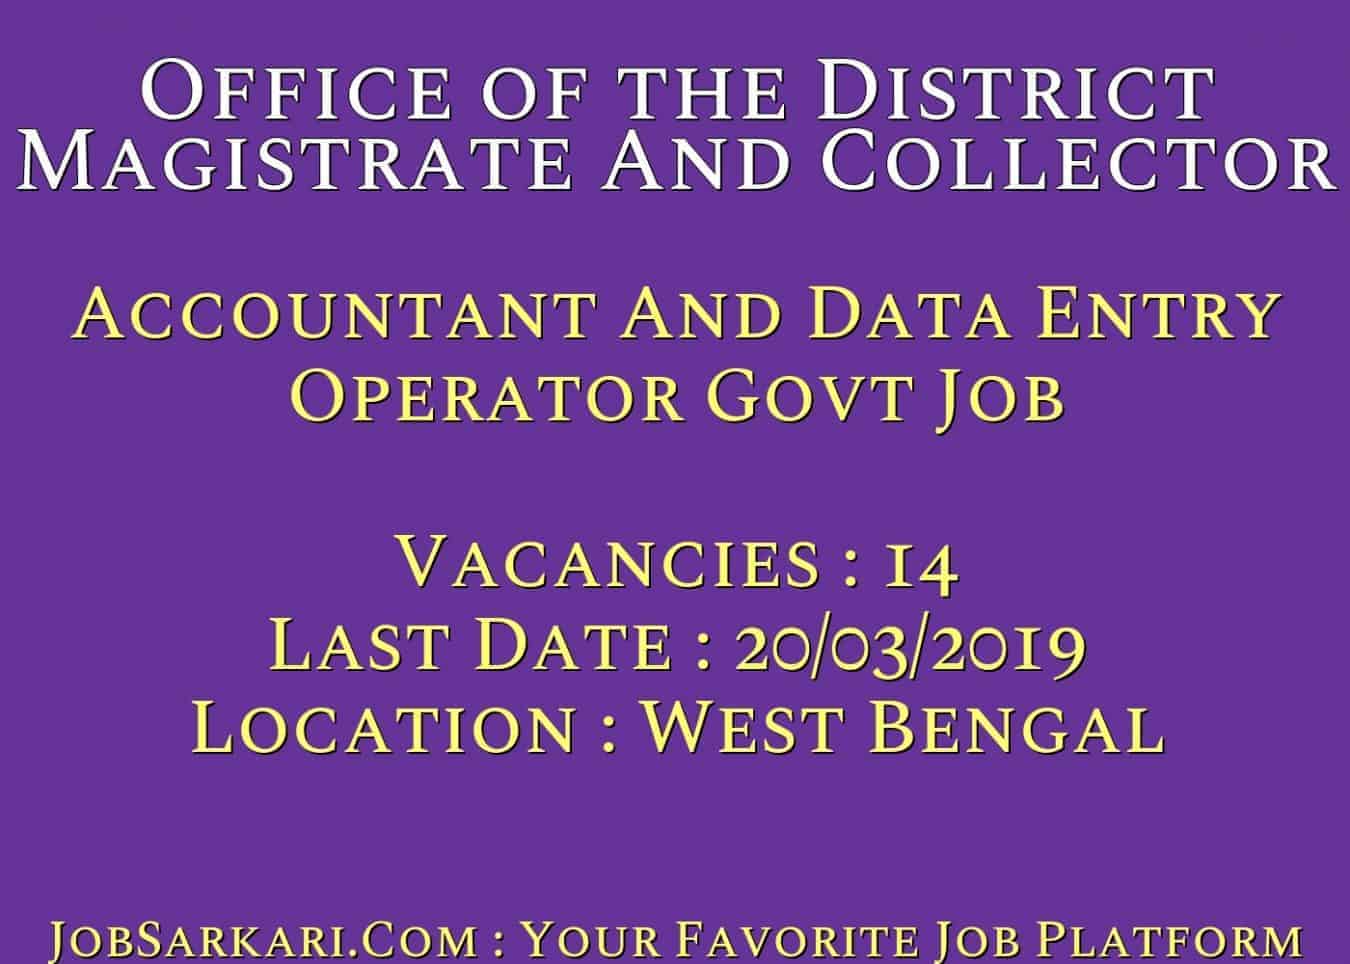 Office of the District Magistrate And Collector Recruitment 2019 For Accountant And Data Entry Operator Govt Job